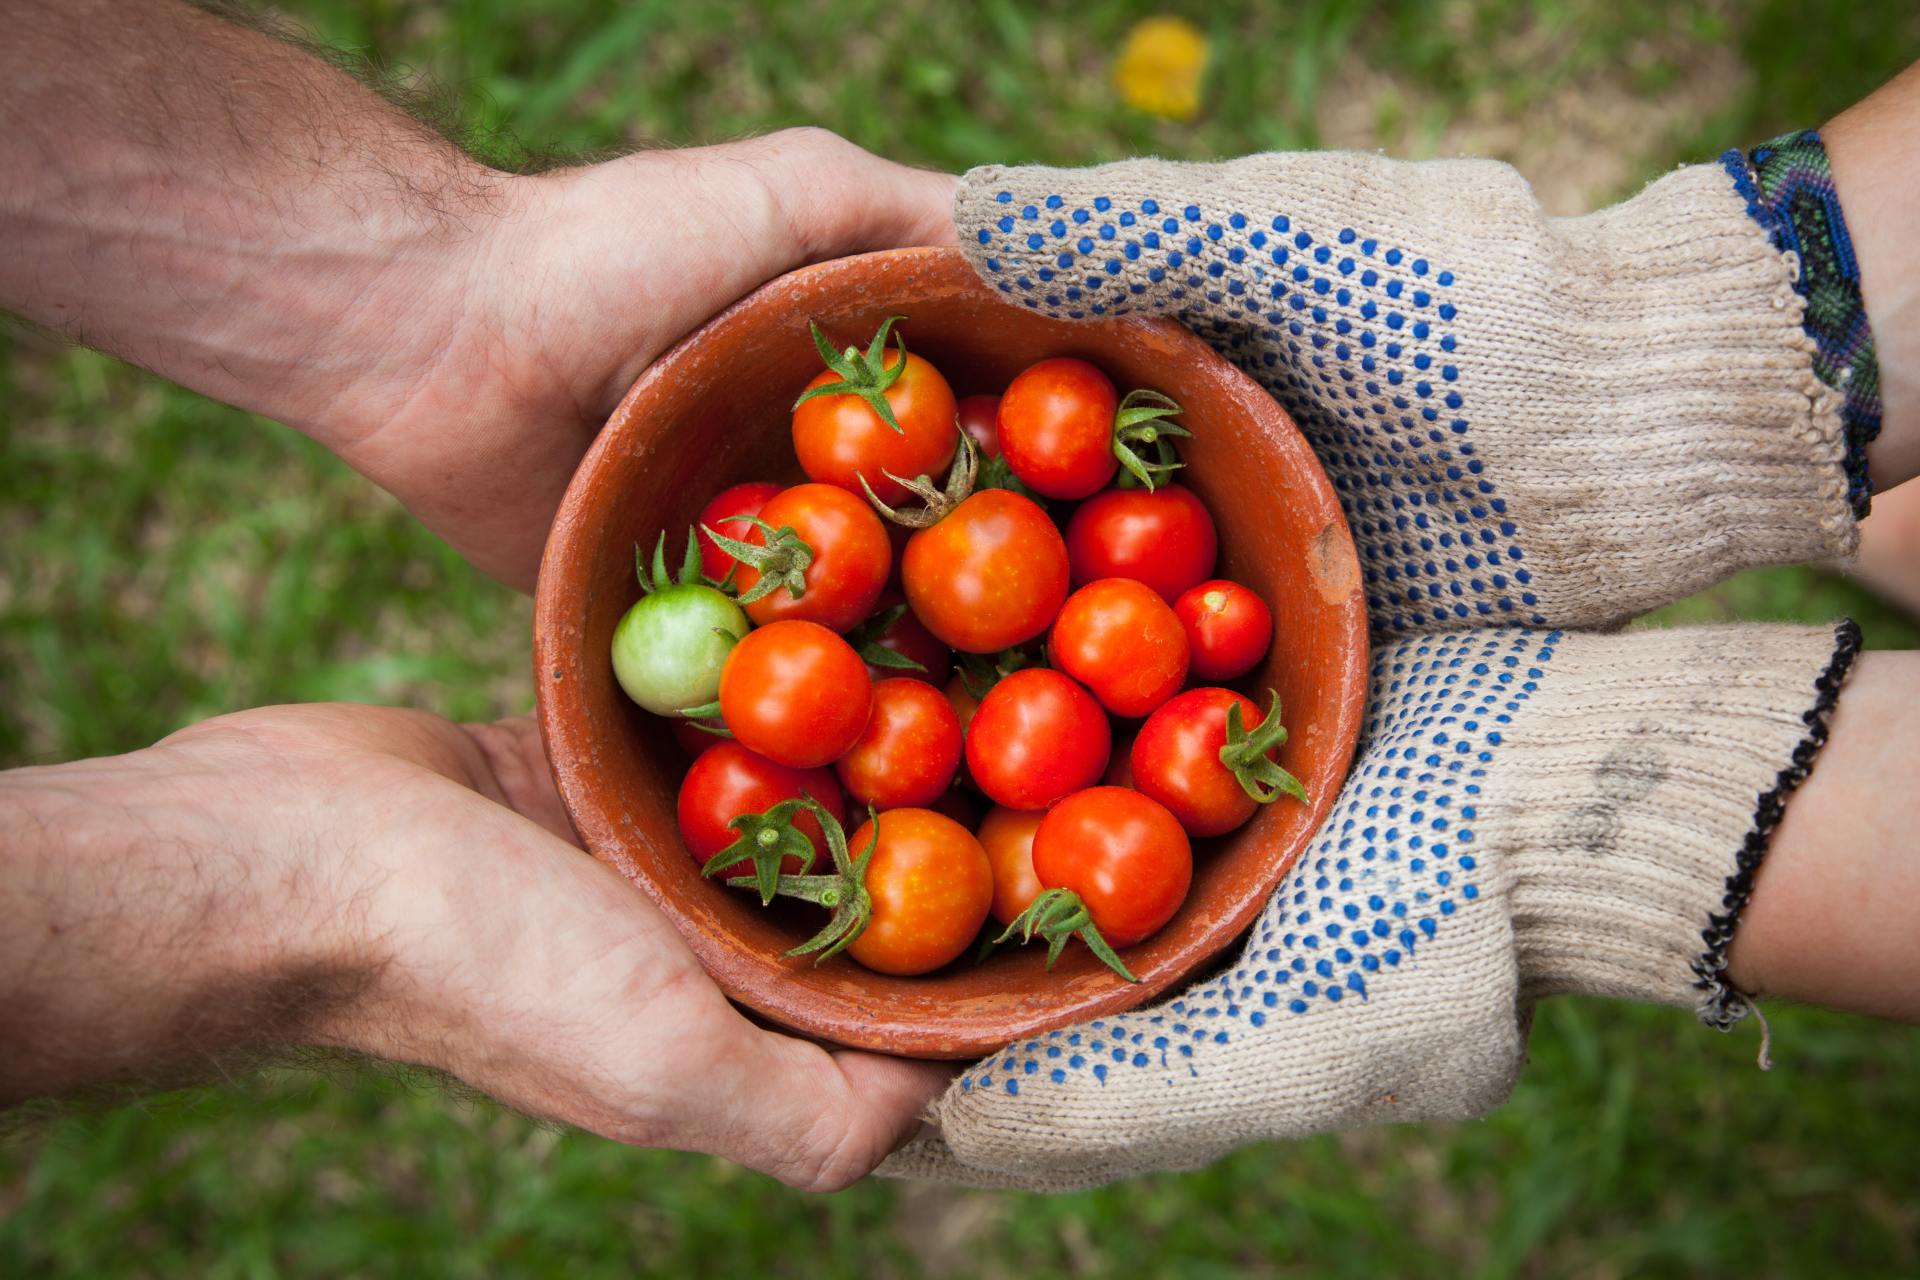 A bowl of tomatoes being handed from one pair of hands to another, illustrating sharing fruits of labor.